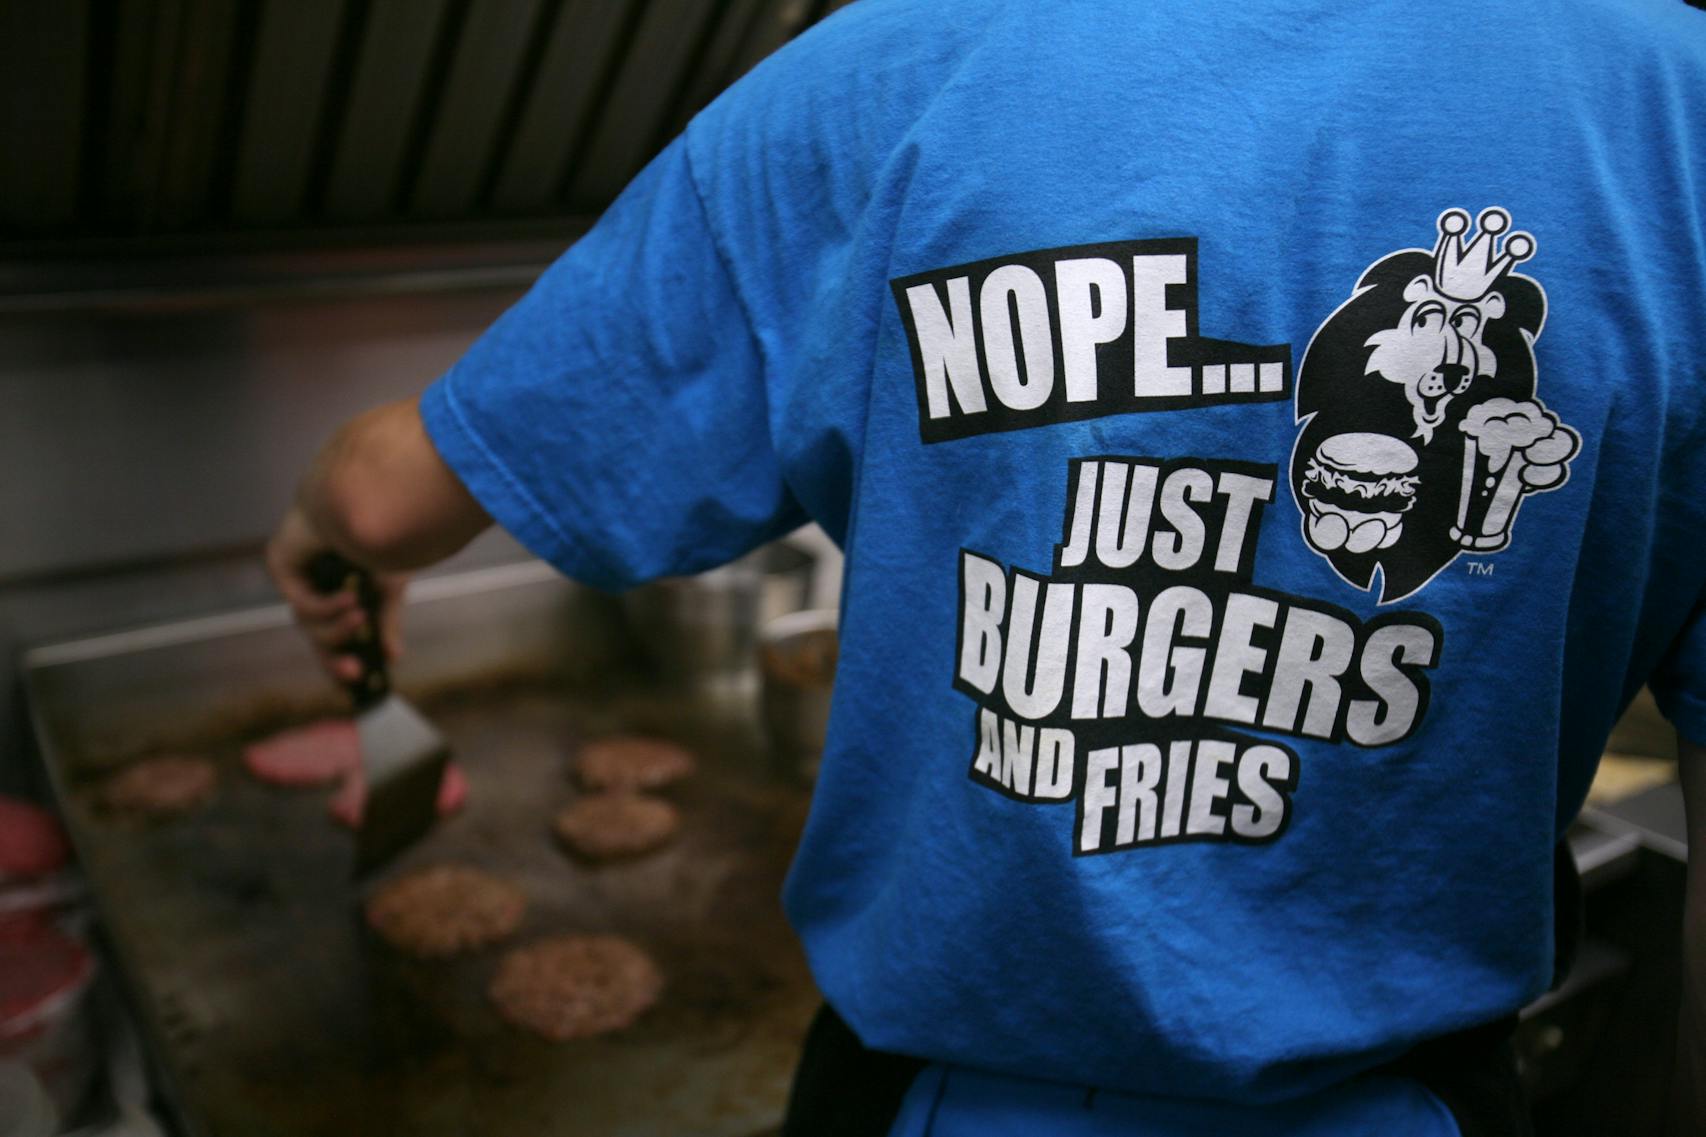 JEFF WHEELER ¥ jwheeler@startribune.com EDEN PRAIRIE - 10/11/07 - The Lions Tap is celebrating its 30th anniversary under the ownership of Bert and Bonnie Notermann next month. The Eden Prairie institution makes burgers and fries and not much else. IN THIS PHOTO: Cook Brian Garbowicz’s t-shirt sums up the Lions Tap’s mission as he flipped burgers Thursday night.